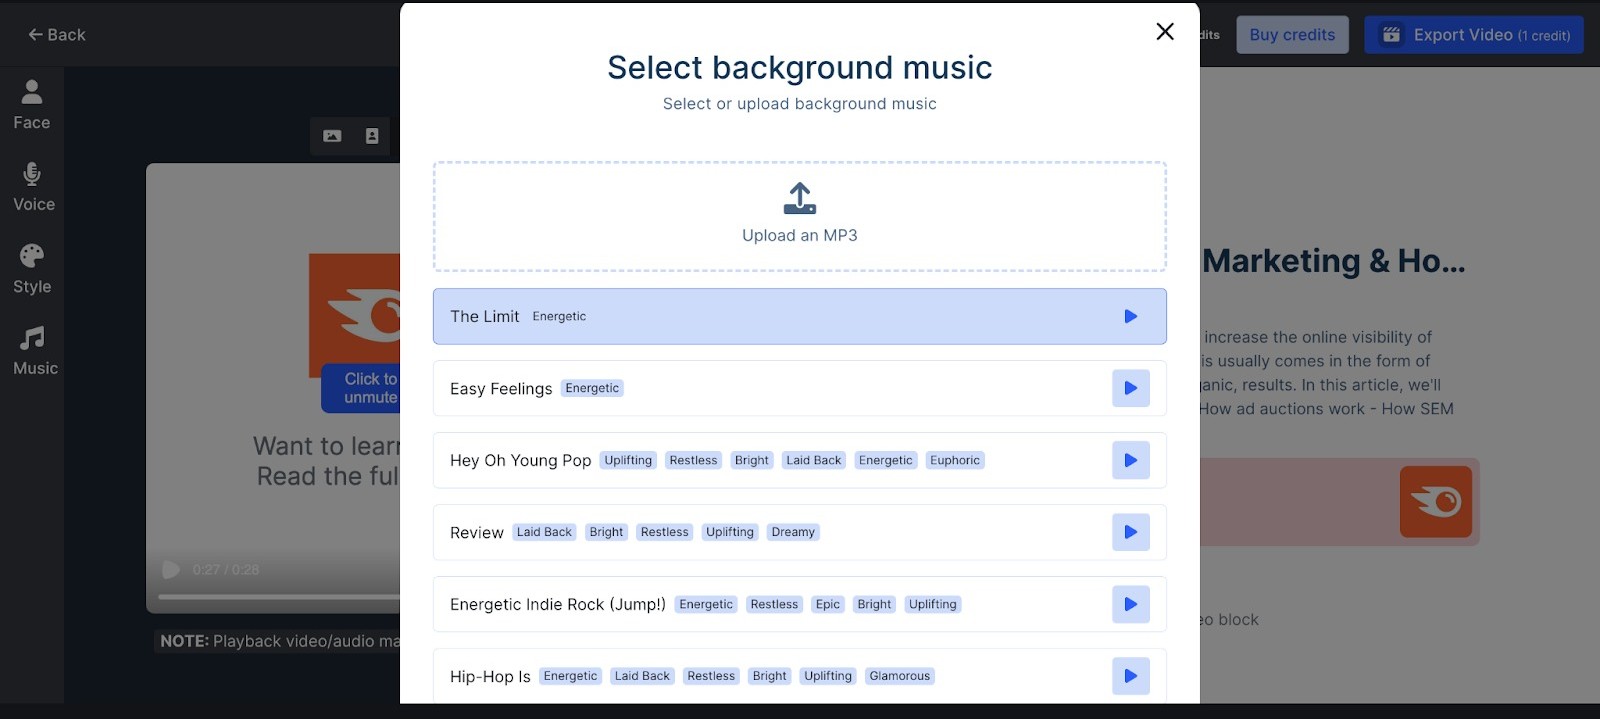 Shows two options: to upload an MP3 to set your own background music, or to choose from music already provided. Examples of provided music include tags for different styles, such as energetic, laid back, and restless.